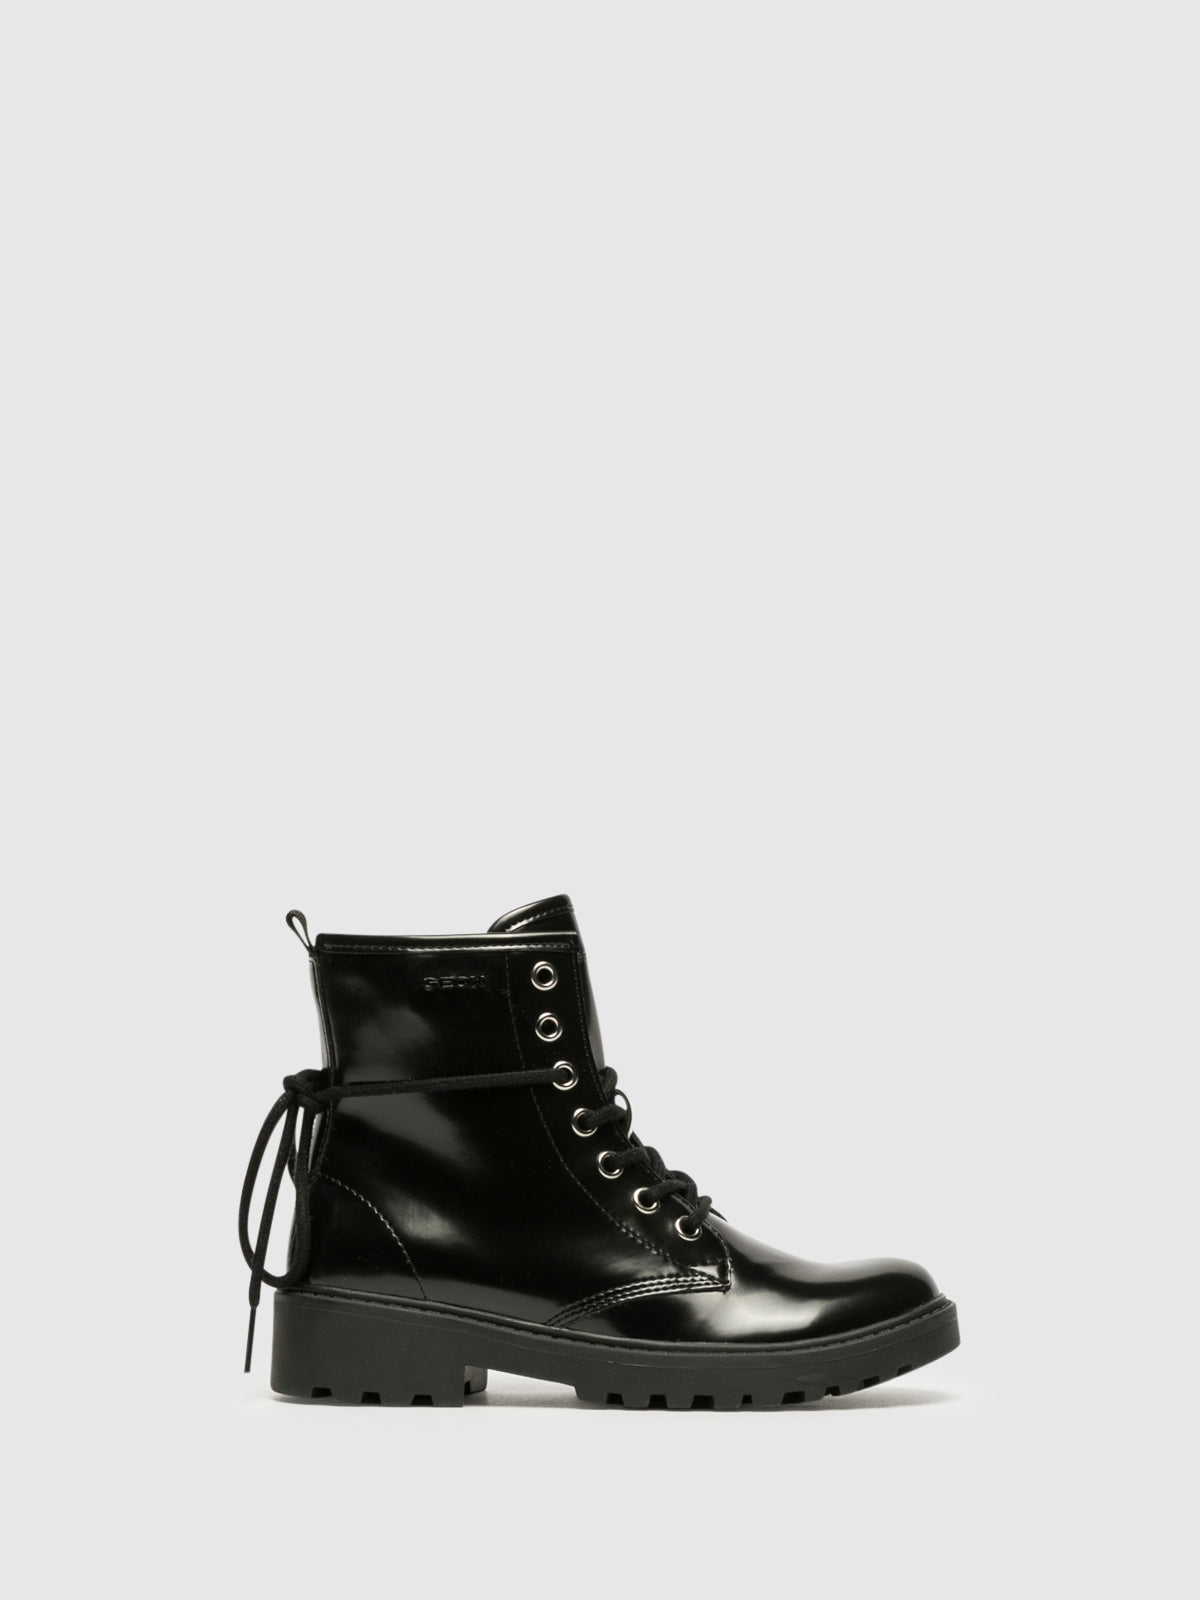 Geox Black Zip Up Ankle Boots